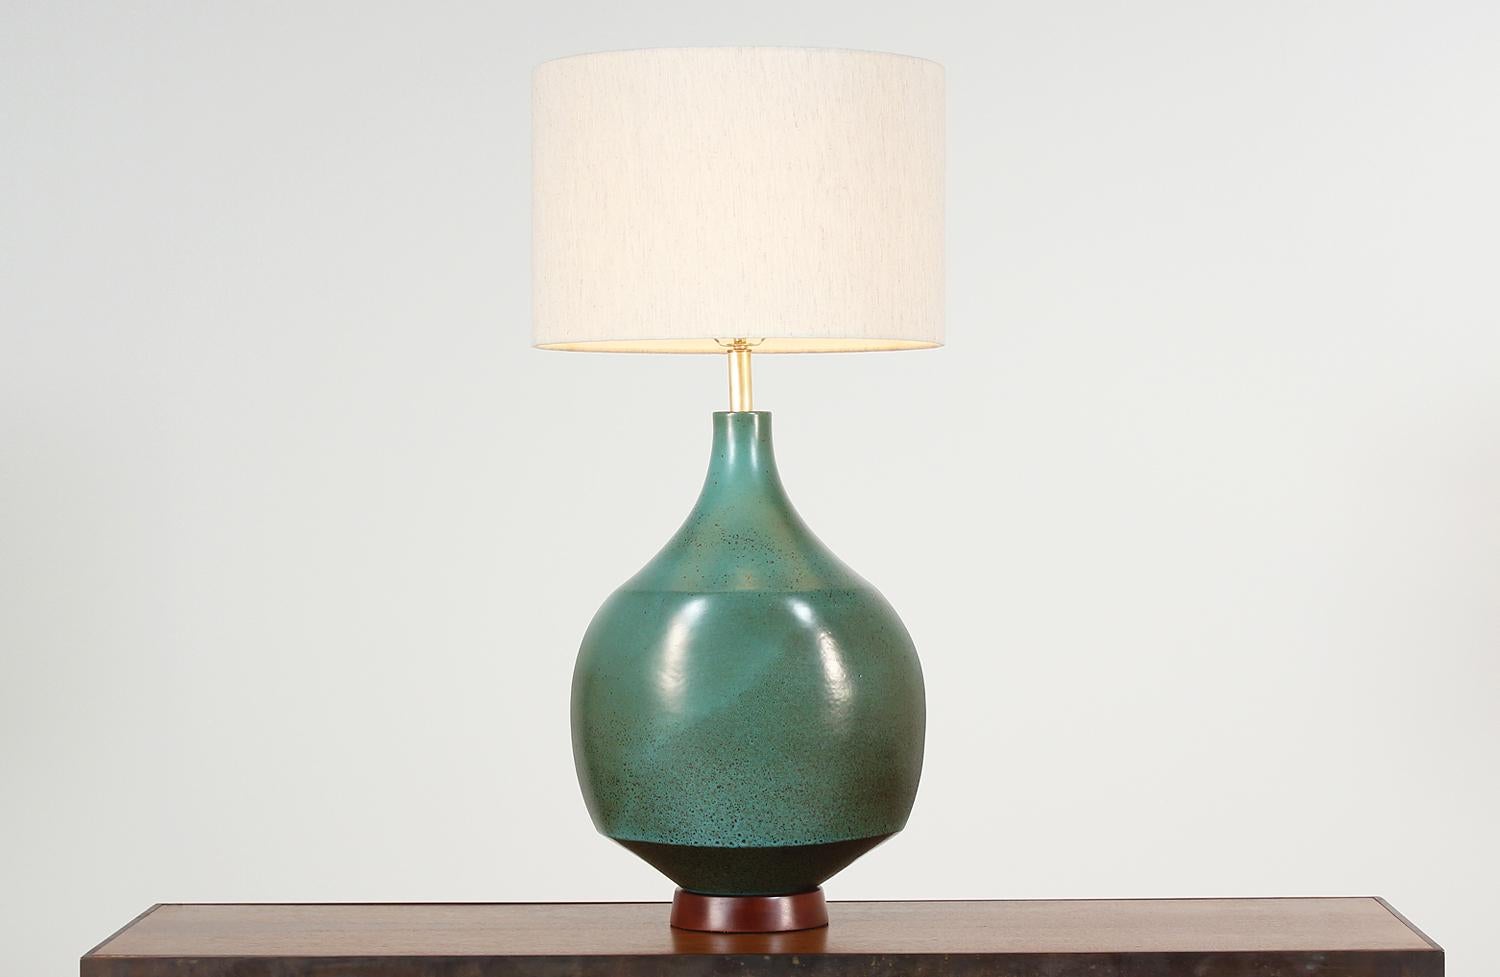 Large ceramic table lamp designed by David Cressey for Architectural Pottery in the United States, circa 1970. This beautiful ceramic lamp features a teal blue body with brown speckling that sits on a complementary walnut wood base. Includes new